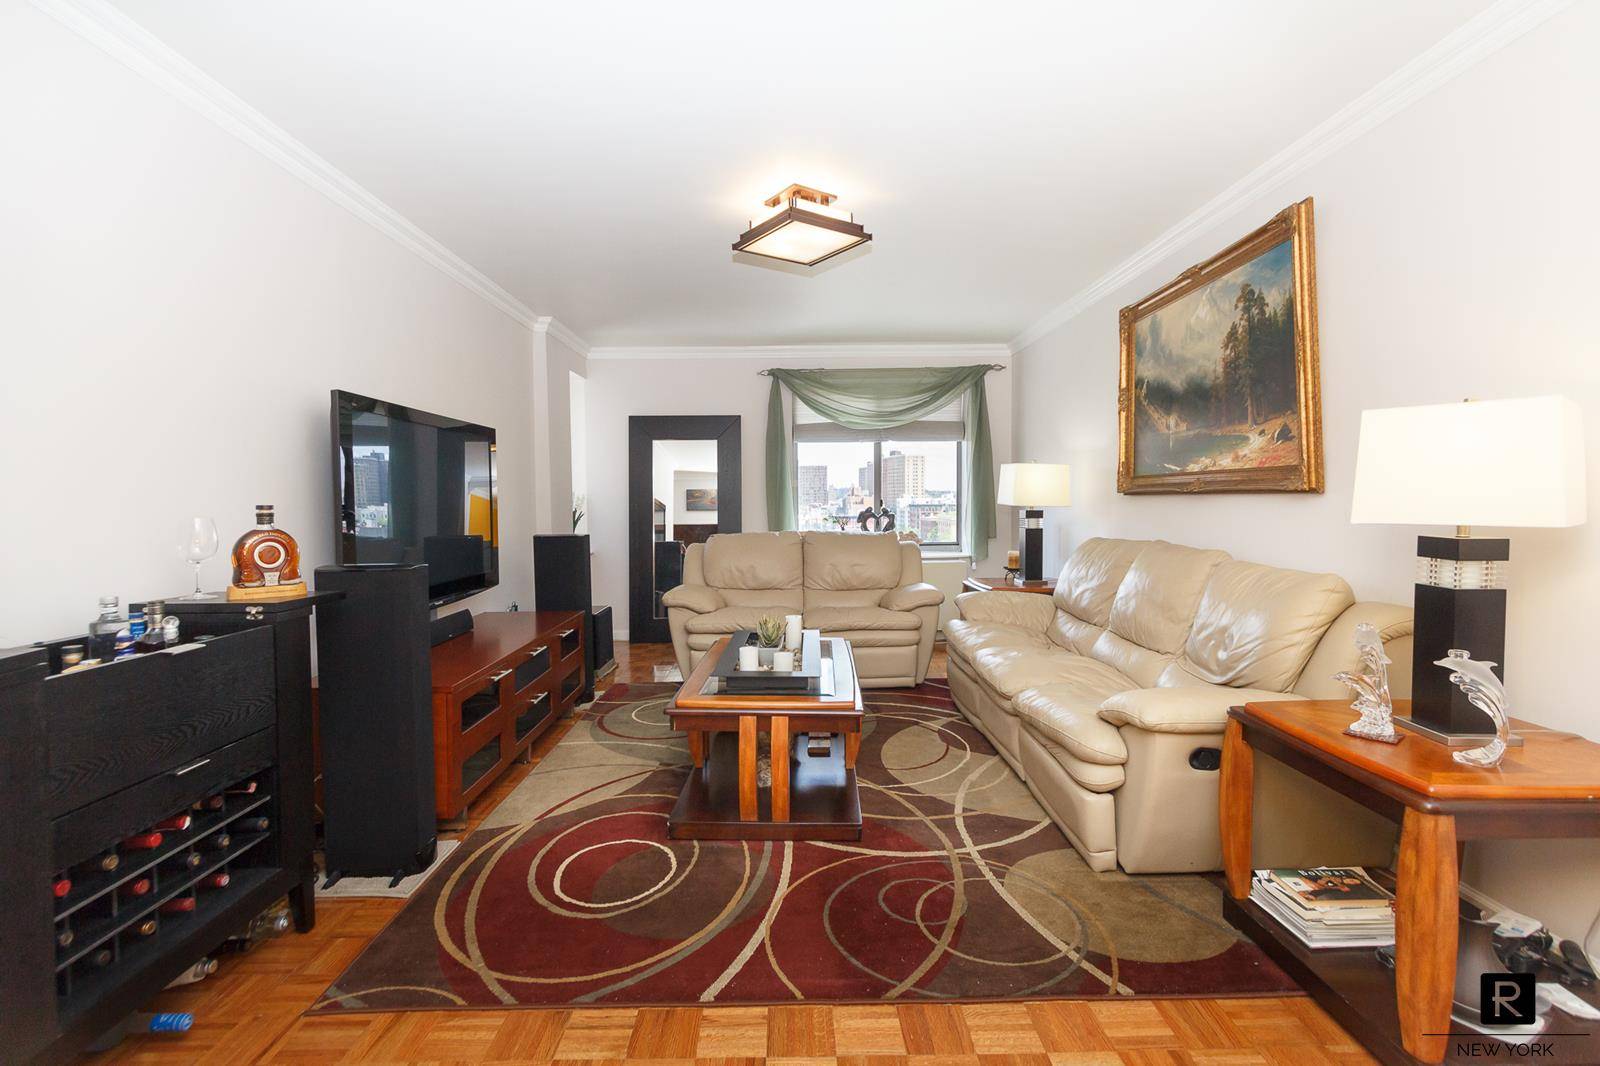 Spacious, bright and airy apartment with Northern exposures providing a beautiful, expansive view of Upper Manhattan.